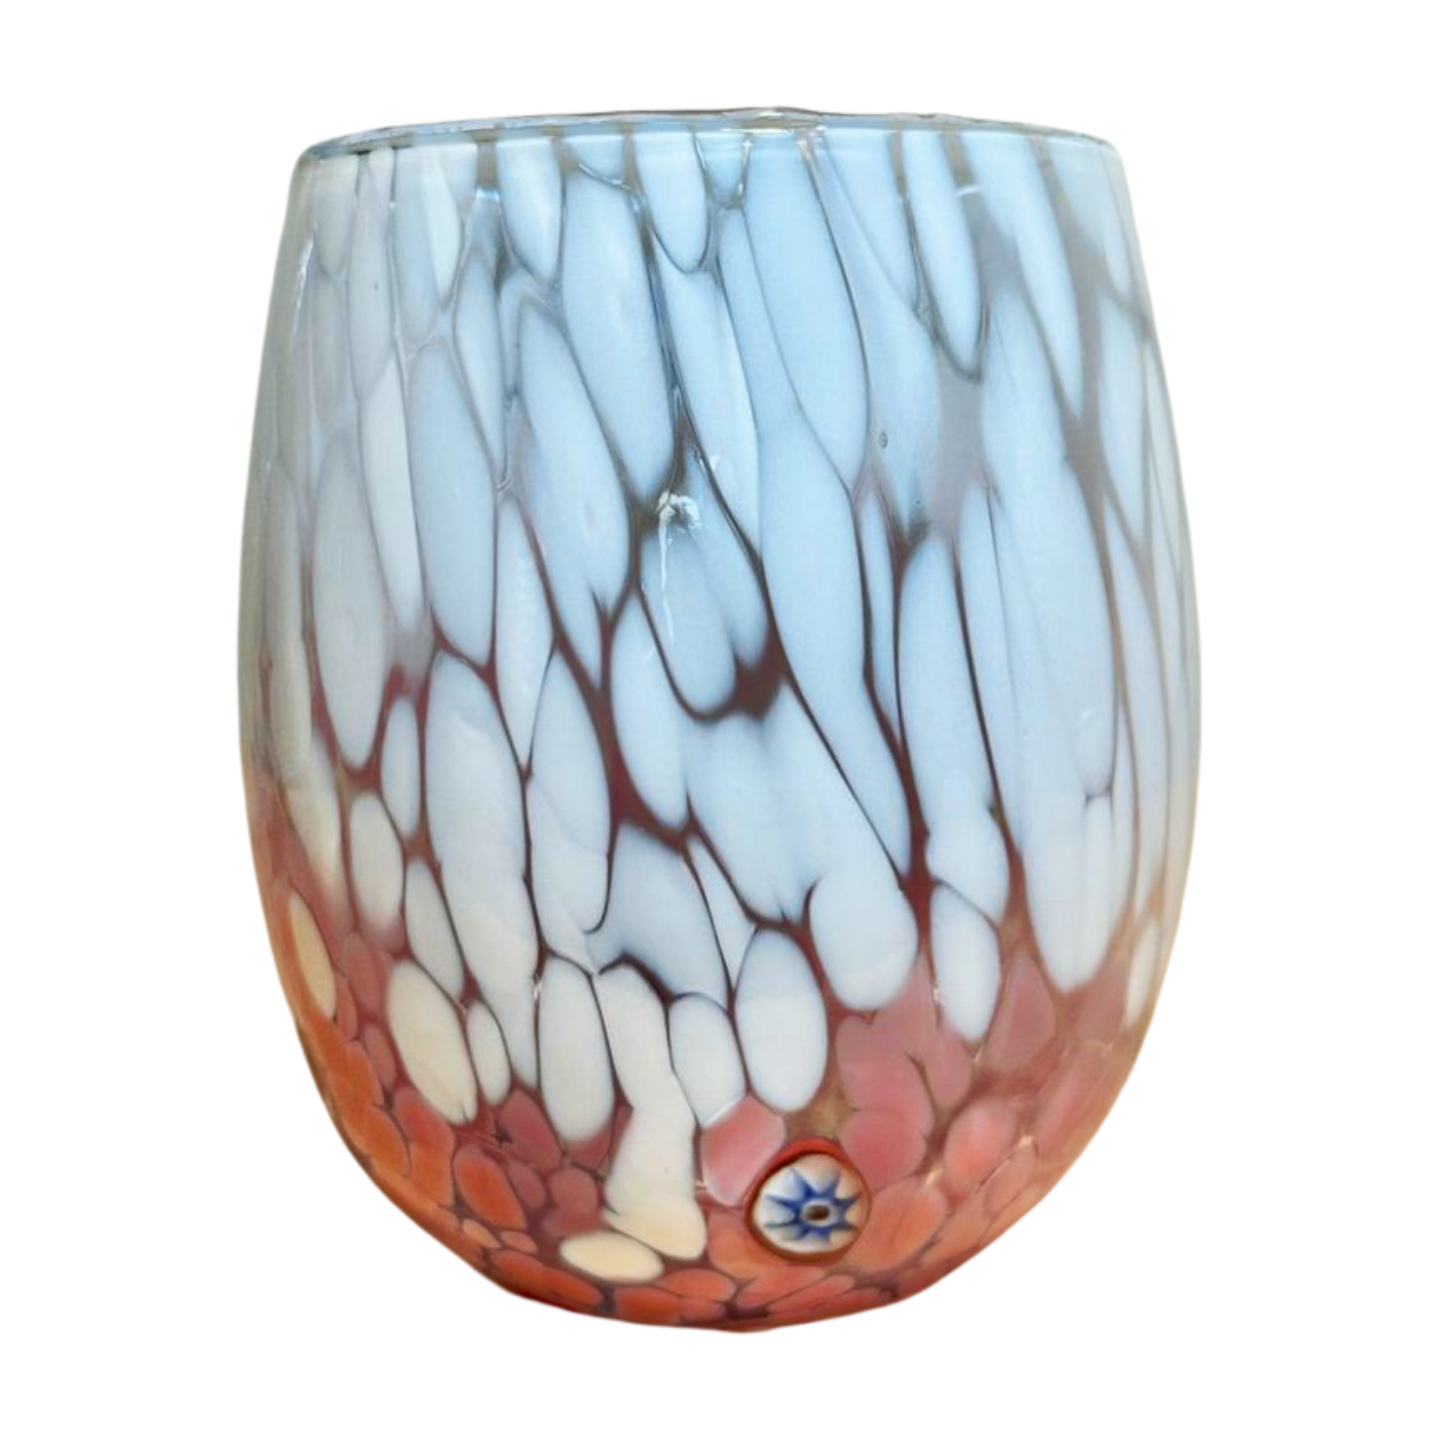 Stemless Murano Wine Glass, Two-Tone shown in pink.